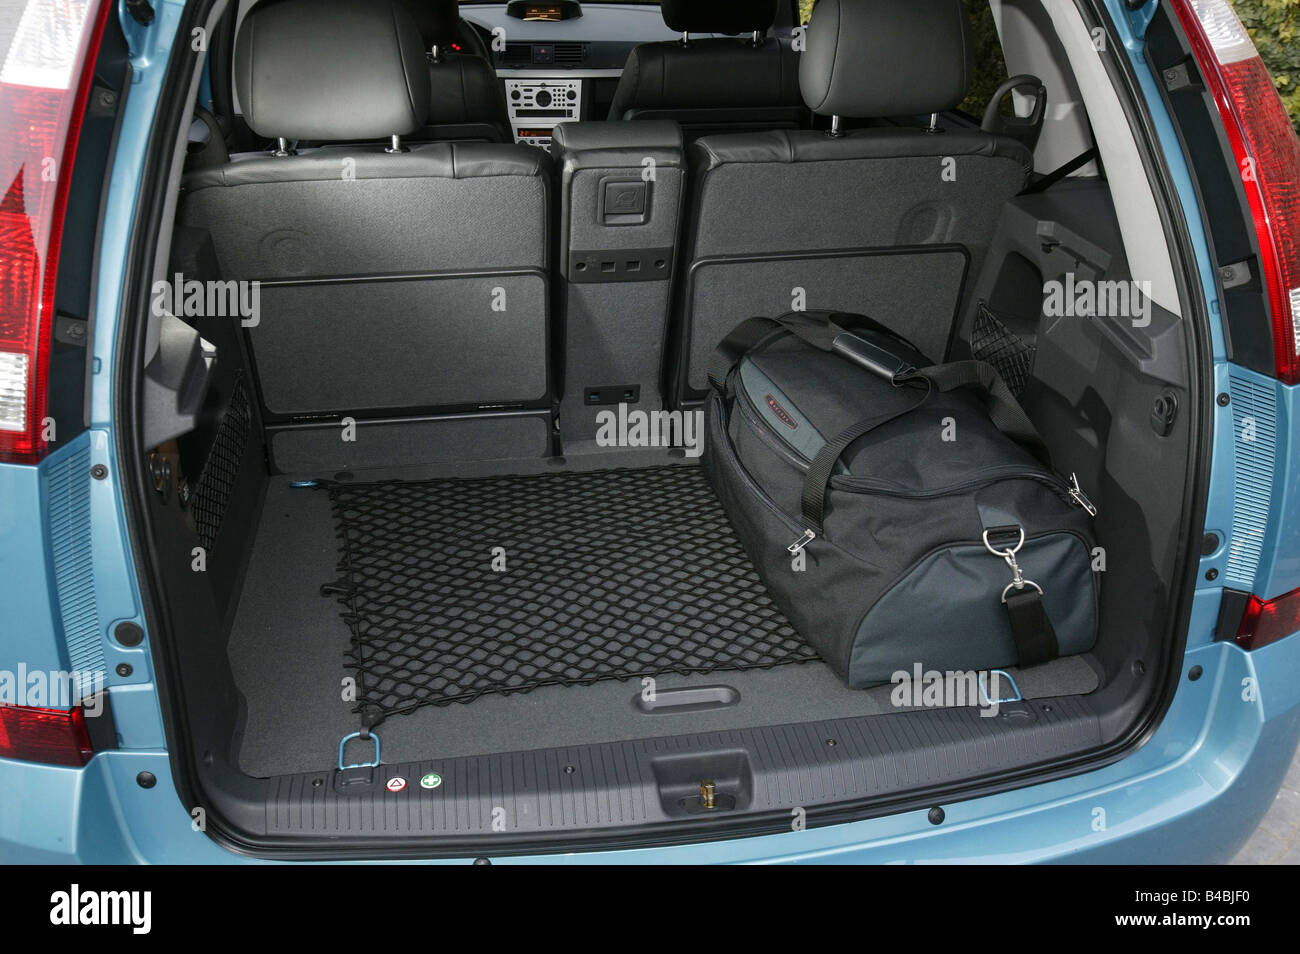 Opel Meriva dimensions, boot space and similars